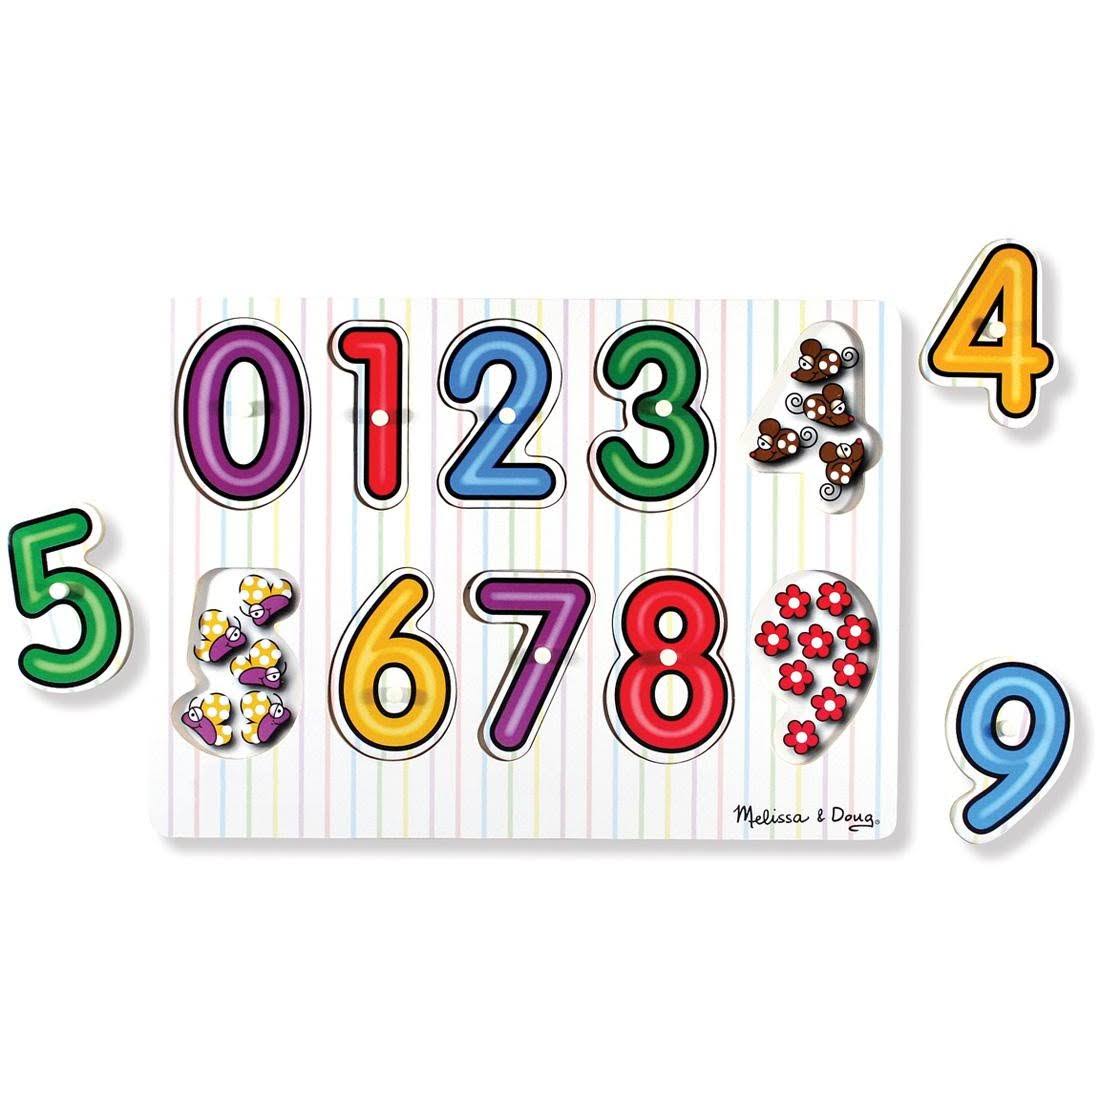 Melissa & Doug See Inside Wooden Peg Puzzle - Numbers